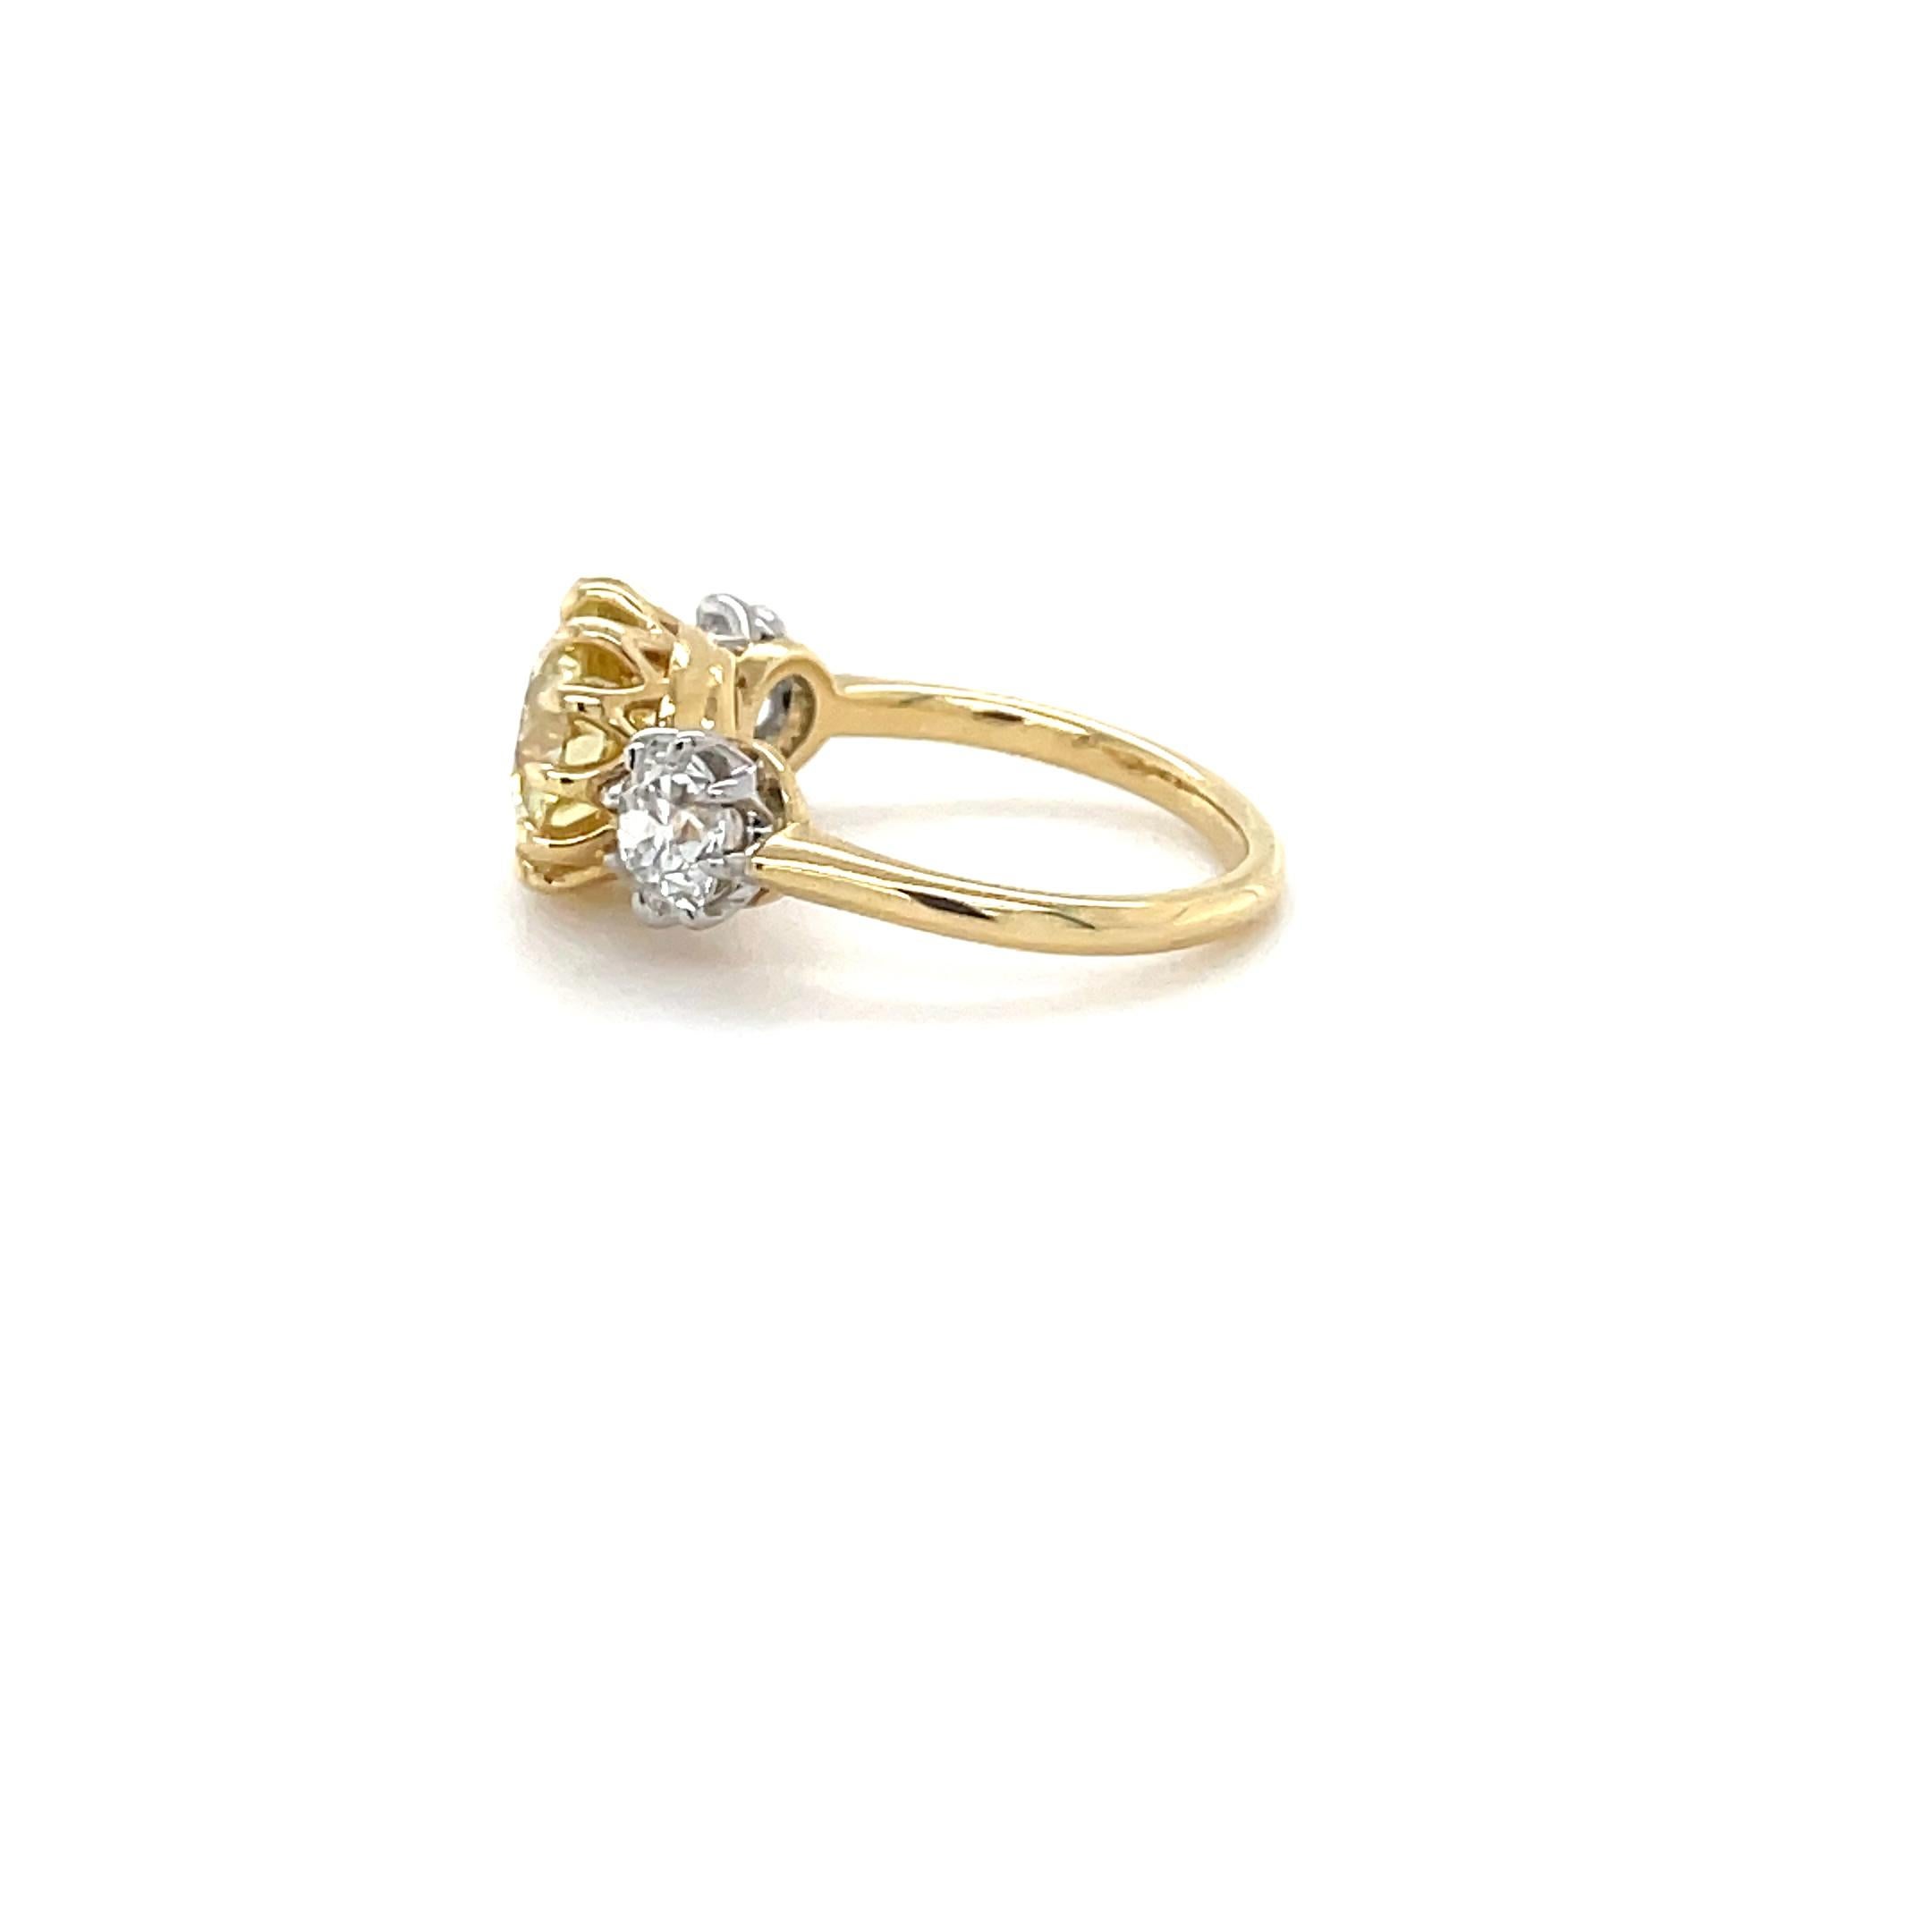 This unique Victorian style three stone diamond ring boasts a 3.08 carat Natural Fancy Yellow cushion cut diamond surrounded by beautiful claw prongs and flanked by two old European cut diamonds mounted in platinum and weighing 1.22 carats total.